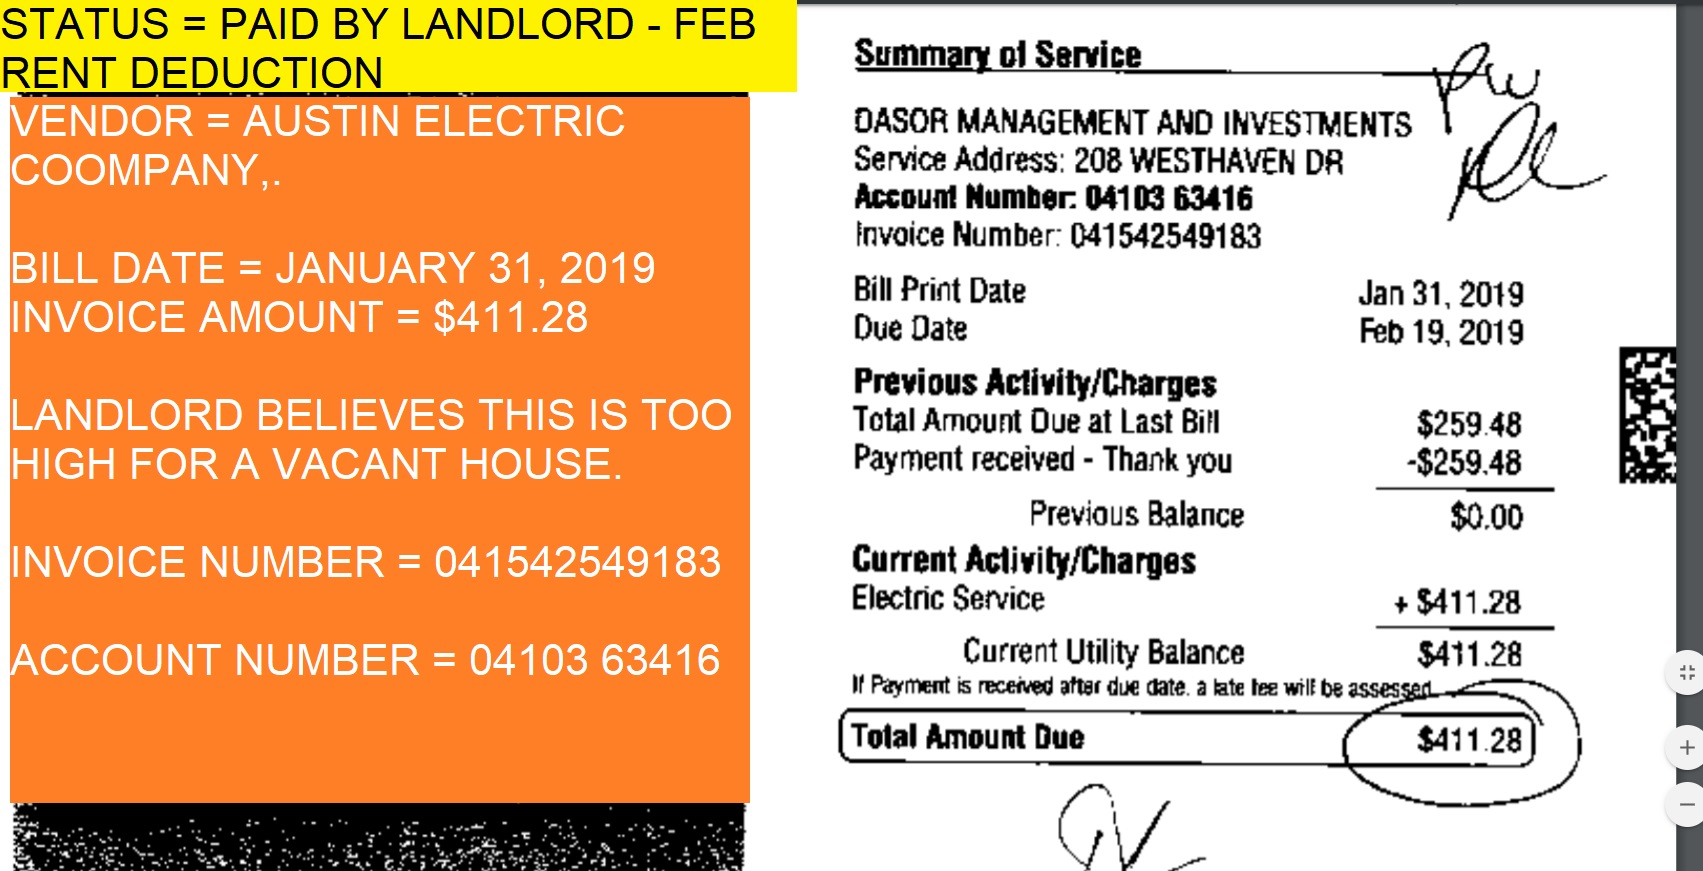 STATUS = PAID BY LANDLORD - FEB RENT DEDUCTION ELECTRIC BILL FOR JANUARY 31, 2019 AMT = $411.28